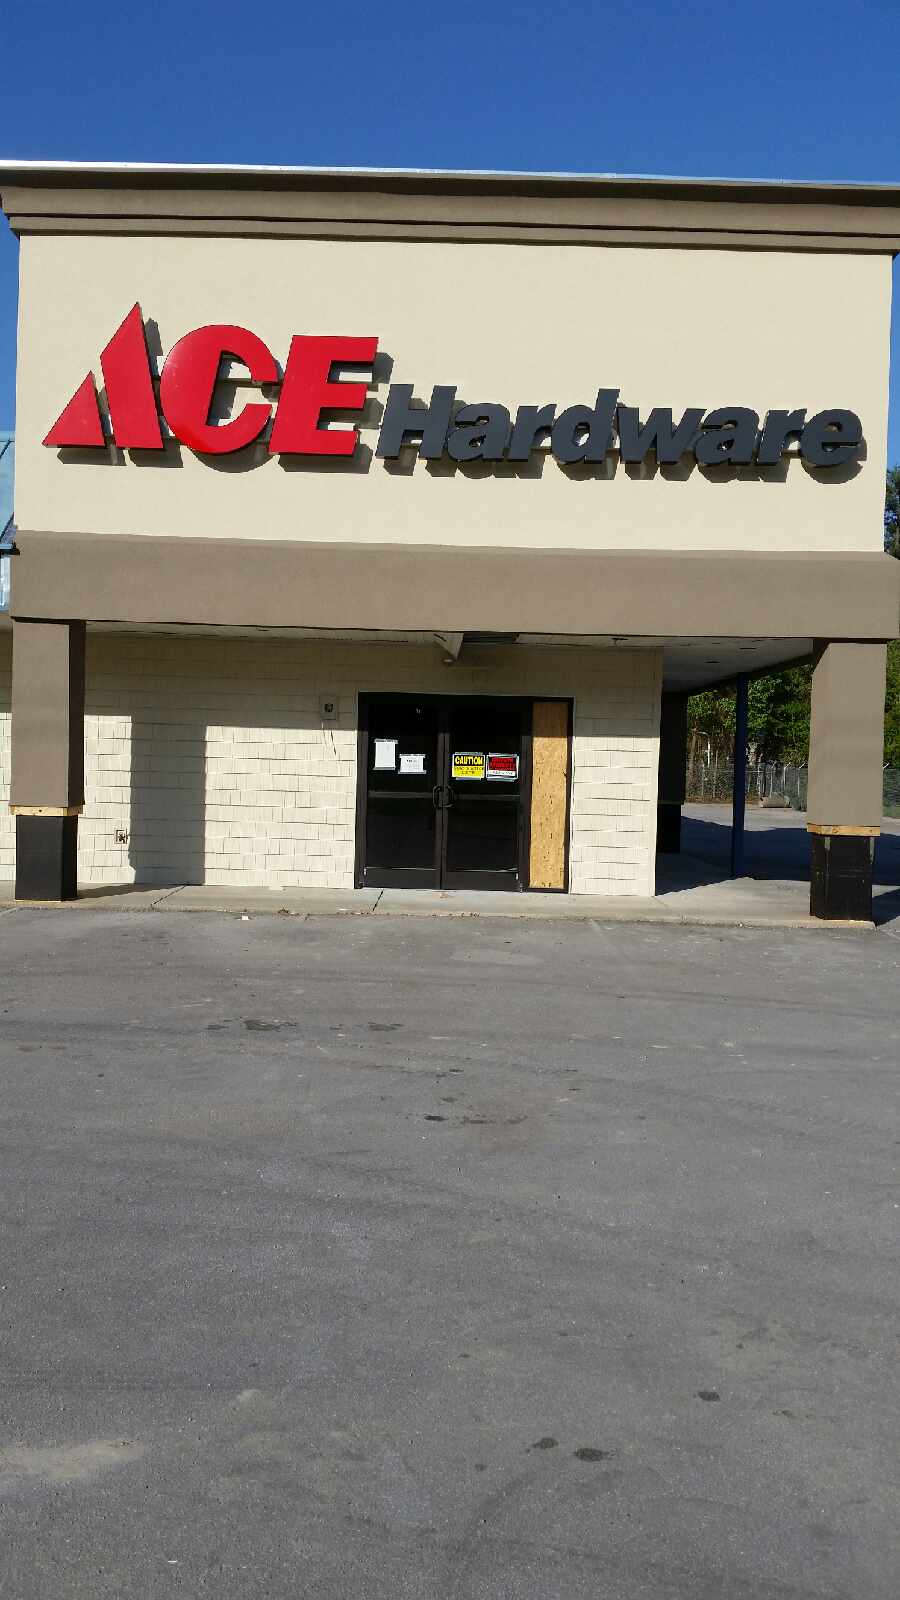  Ace Hardware  2 Signs Unlimited